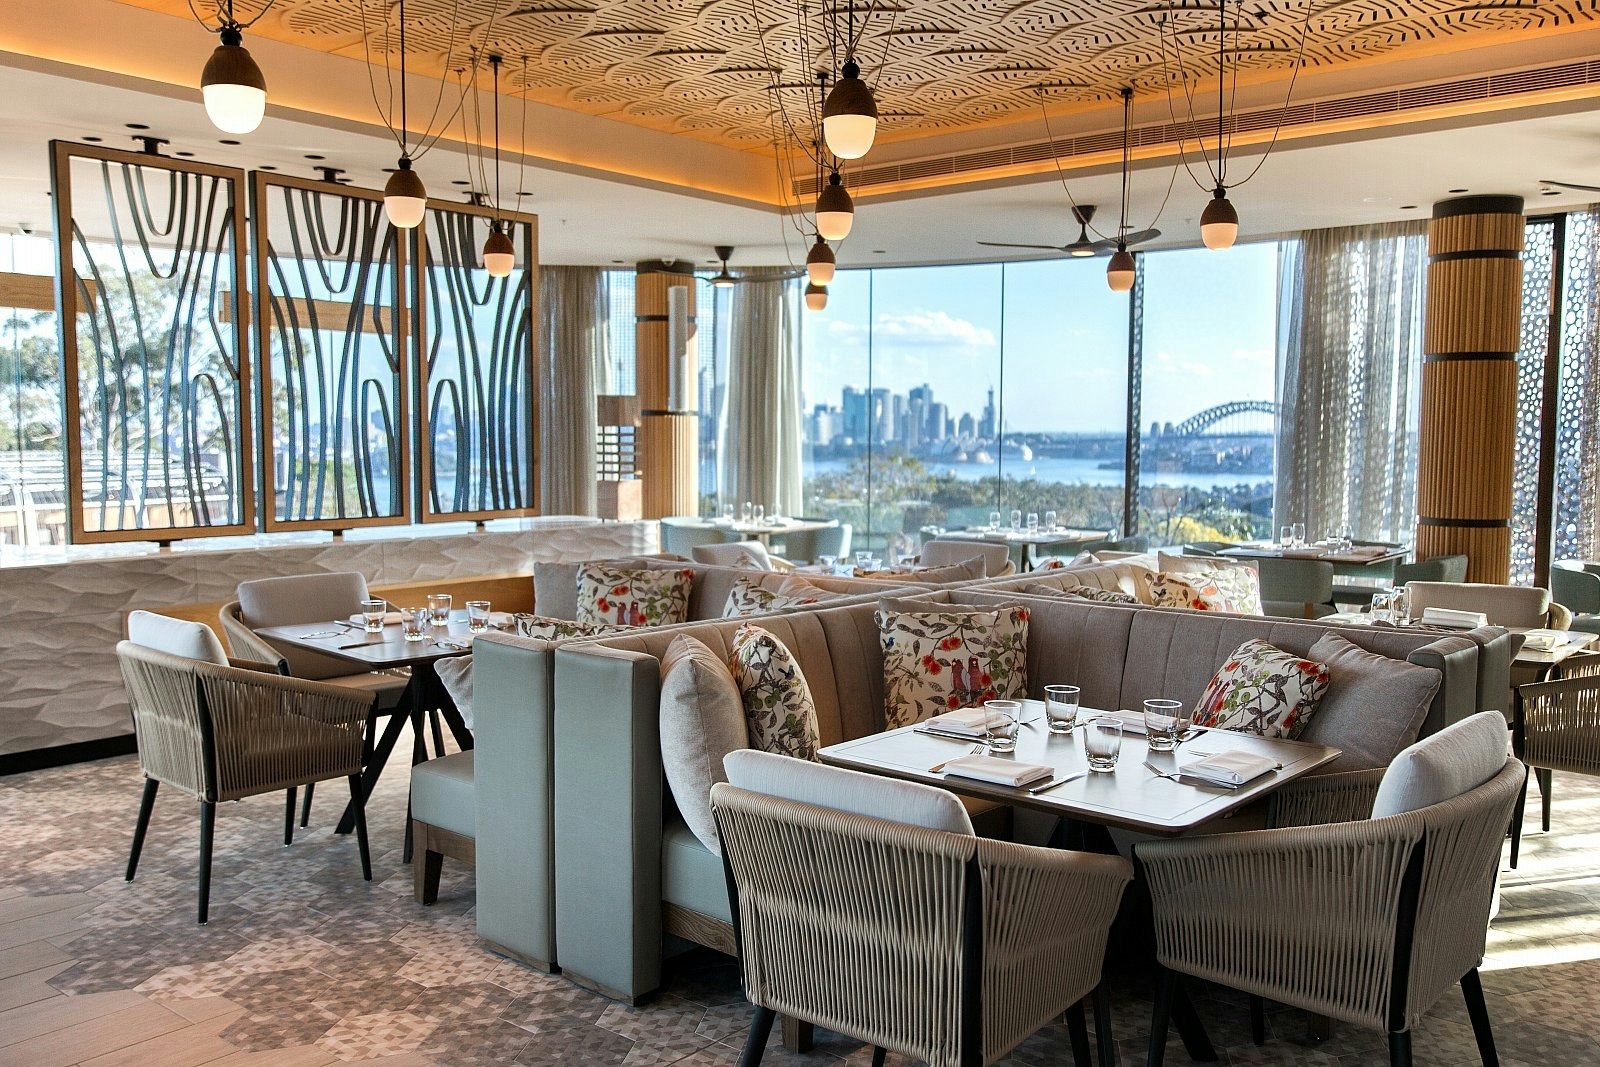 The Me-Gal restaurant interior, with modern furnishings, floral cushions on chairs, and panoramic views over Sydney Harbour.